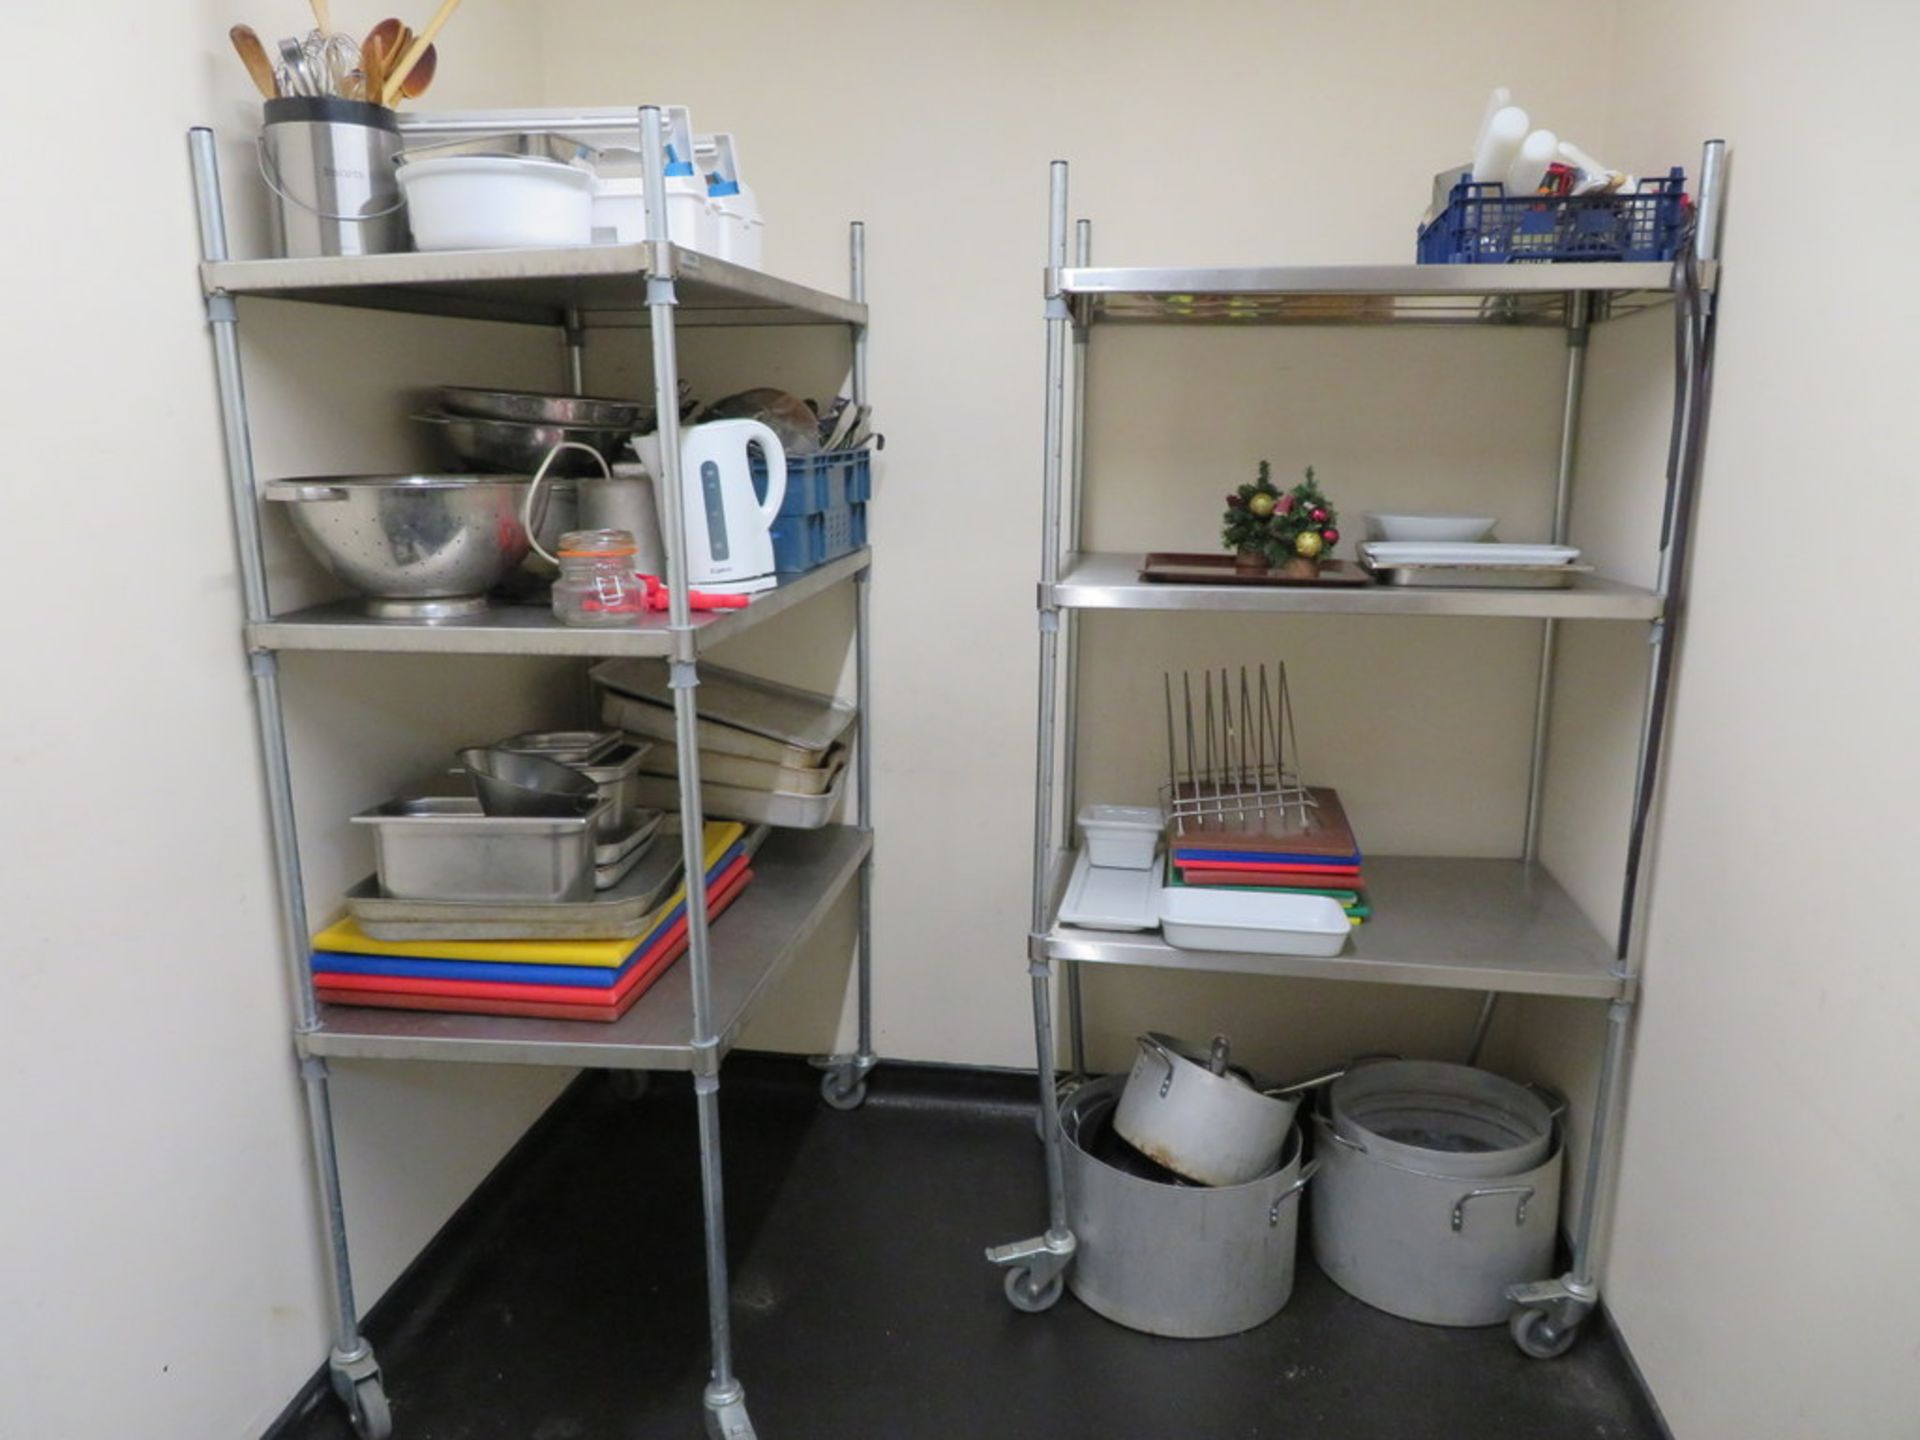 CONTENTS OF THE KITCHEN STORE INCLUDING 2 X STAINLESS STEEL RACKS,